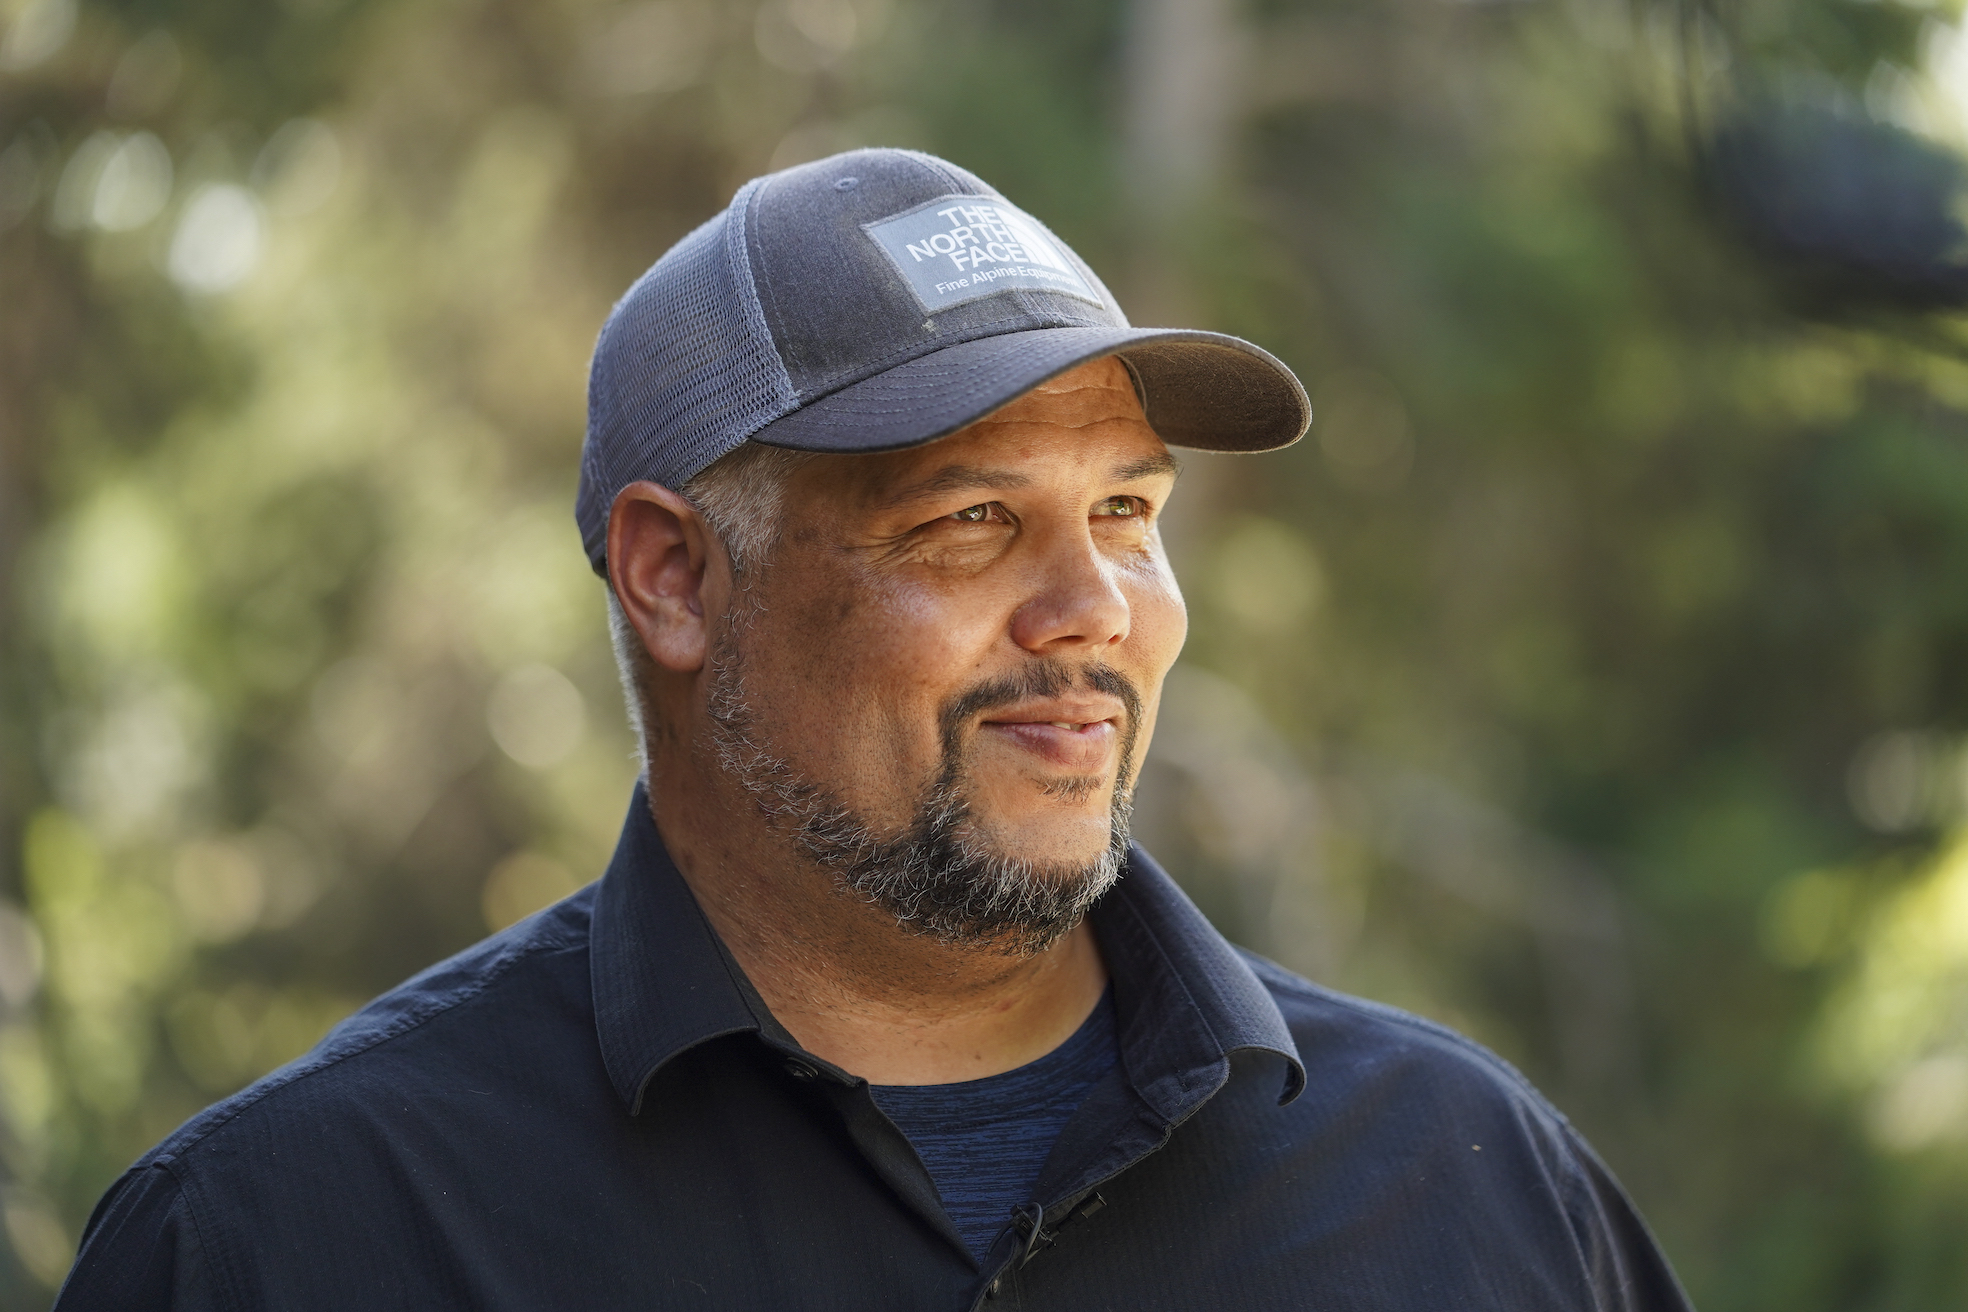 Fish ecologist Levi Lewis says that while grieving for forests and beloved ecosystems is natural, it’s important to remember the climate crises is a humanitarian one. “Saving the planet is really about saving ourselves,” he said. (Karin Higgins/UC Davis)